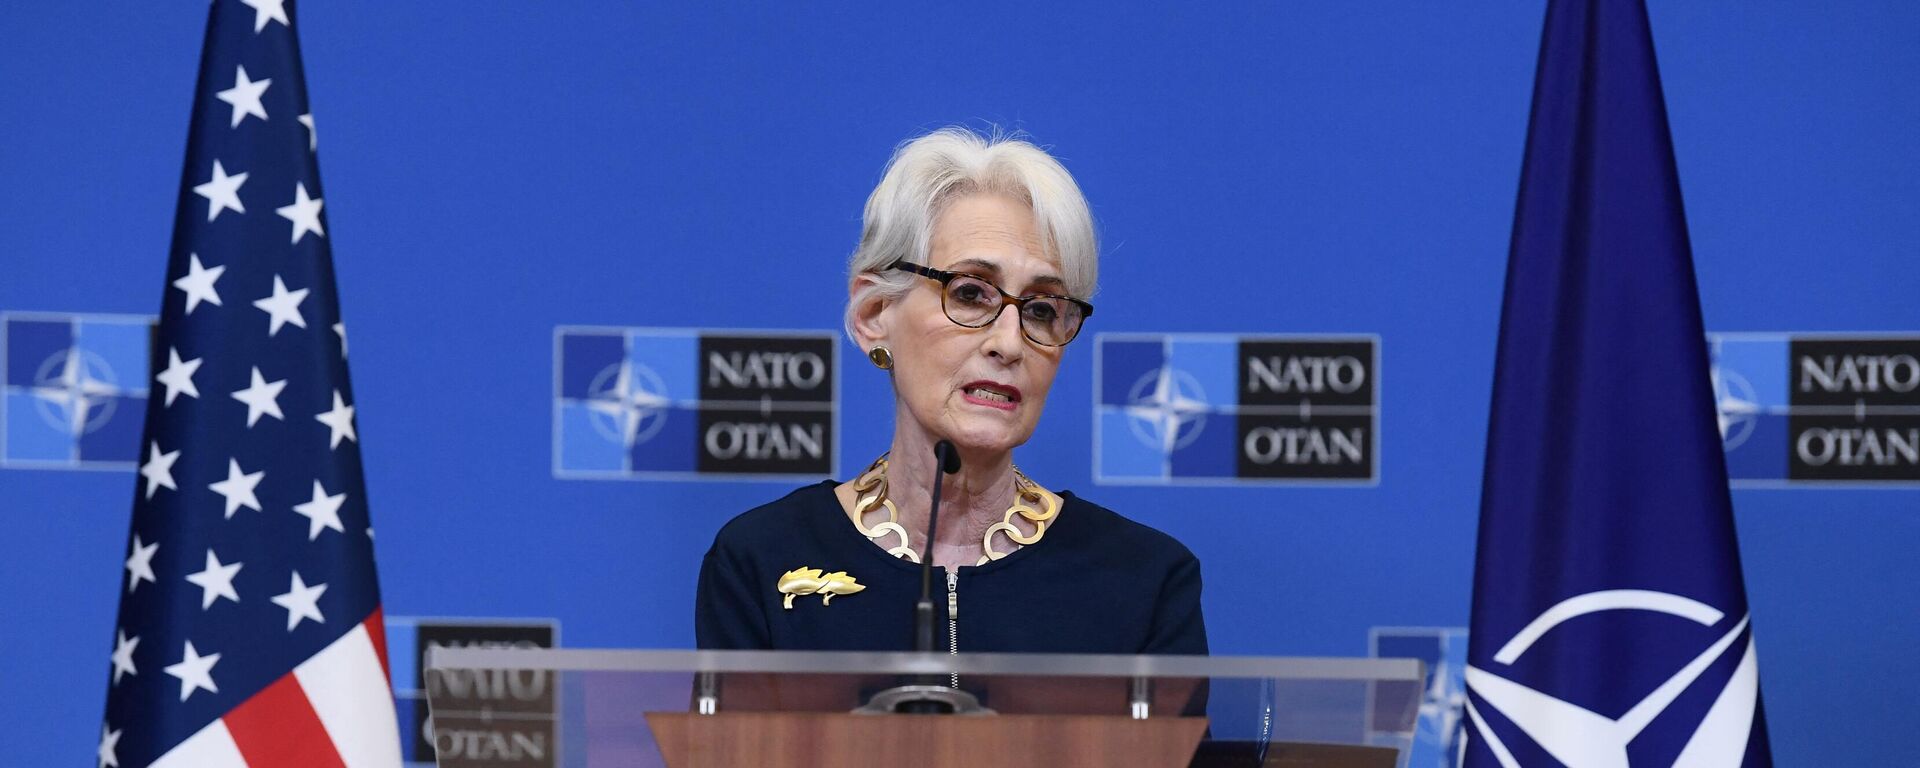 US Deputy Secretary of State Wendy Sherman addresses a press conference following a meeting of the NATO-Russia Council at the NATO headquarters in Brussels on January 12, 2022. - Sputnik International, 1920, 12.01.2022